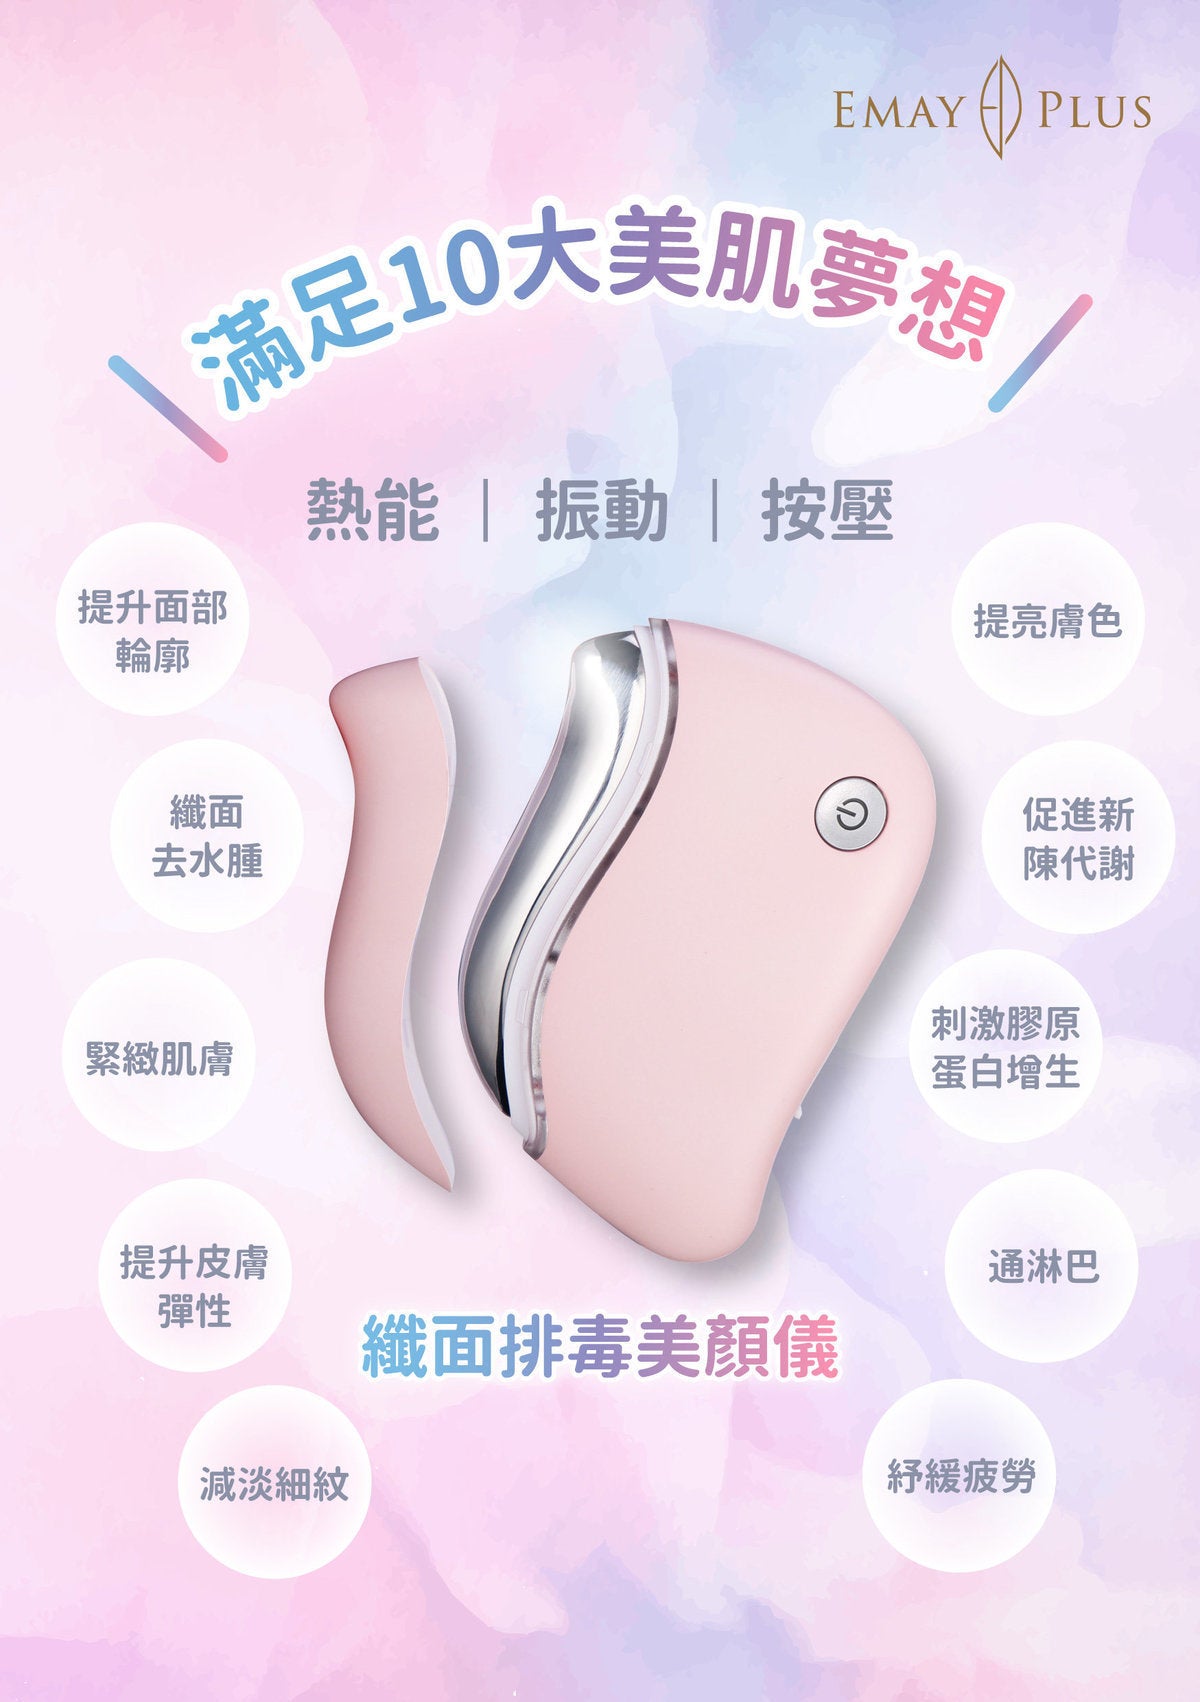 Emay Plus - EP-406 Slimming Detoxifying Beauty Device (Limited Edition) - Sunflower